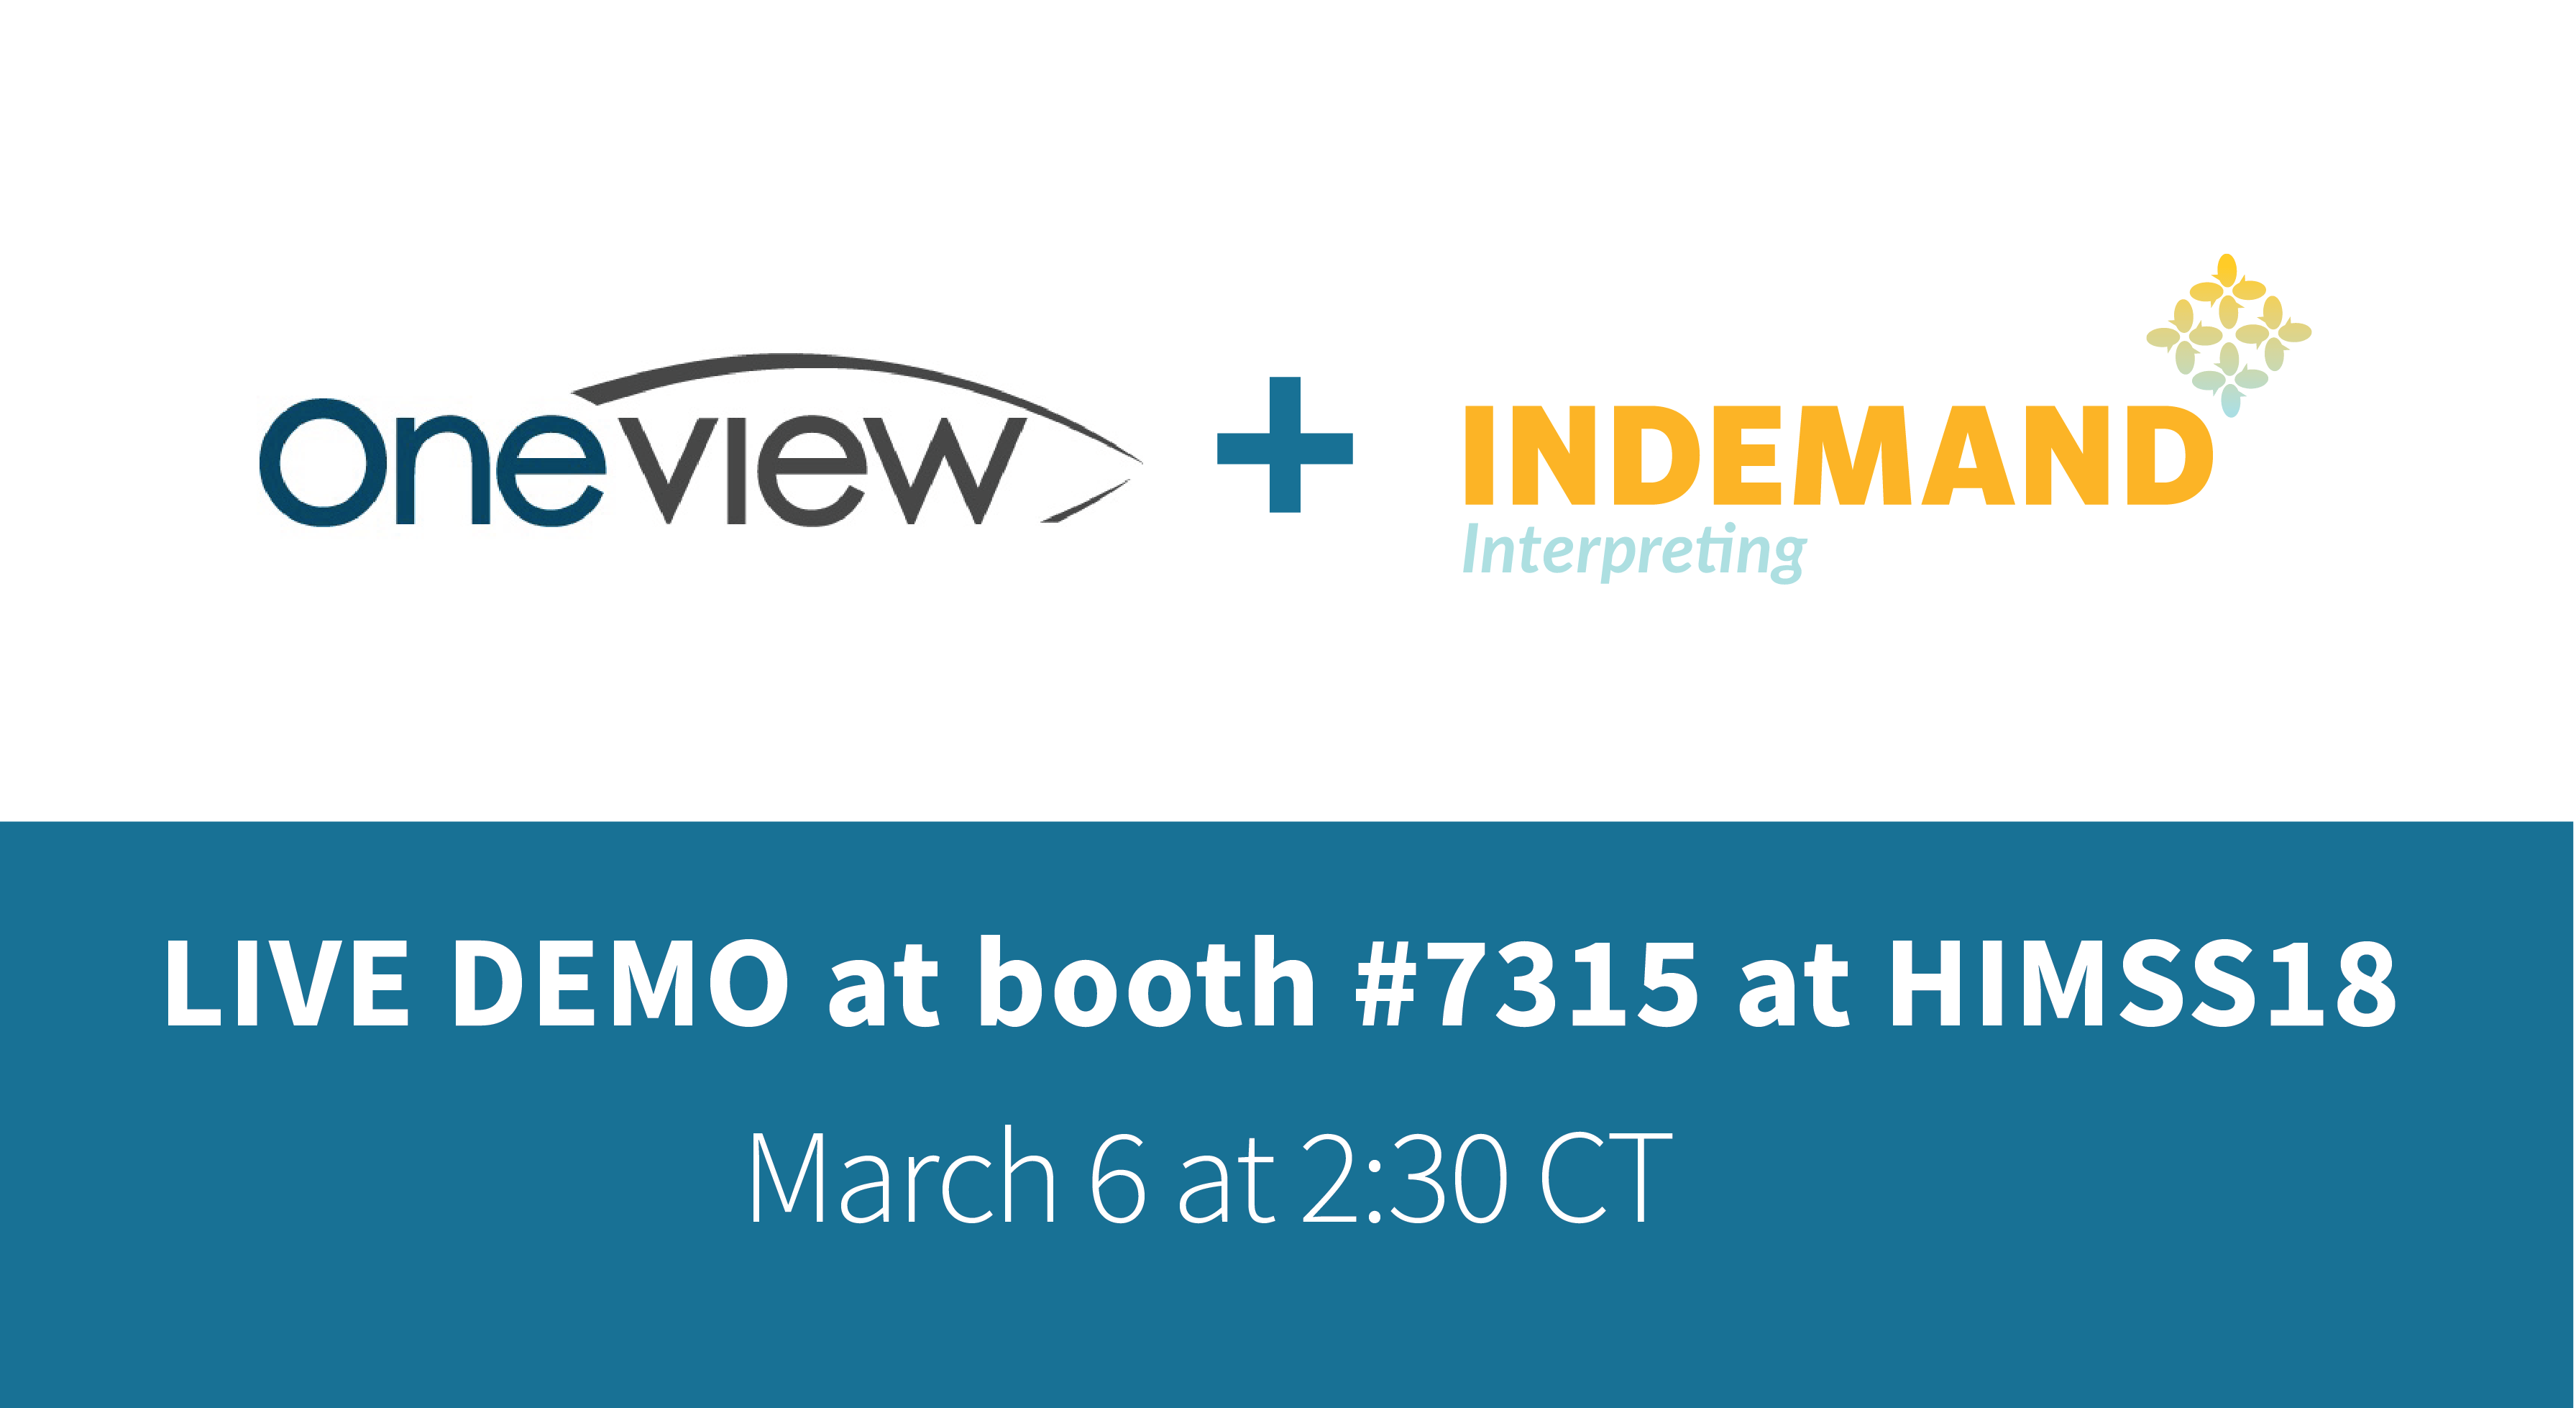 Indemand Logo - HIMSS18 Conference - InDemand and Oneview to Demo Patient Solution